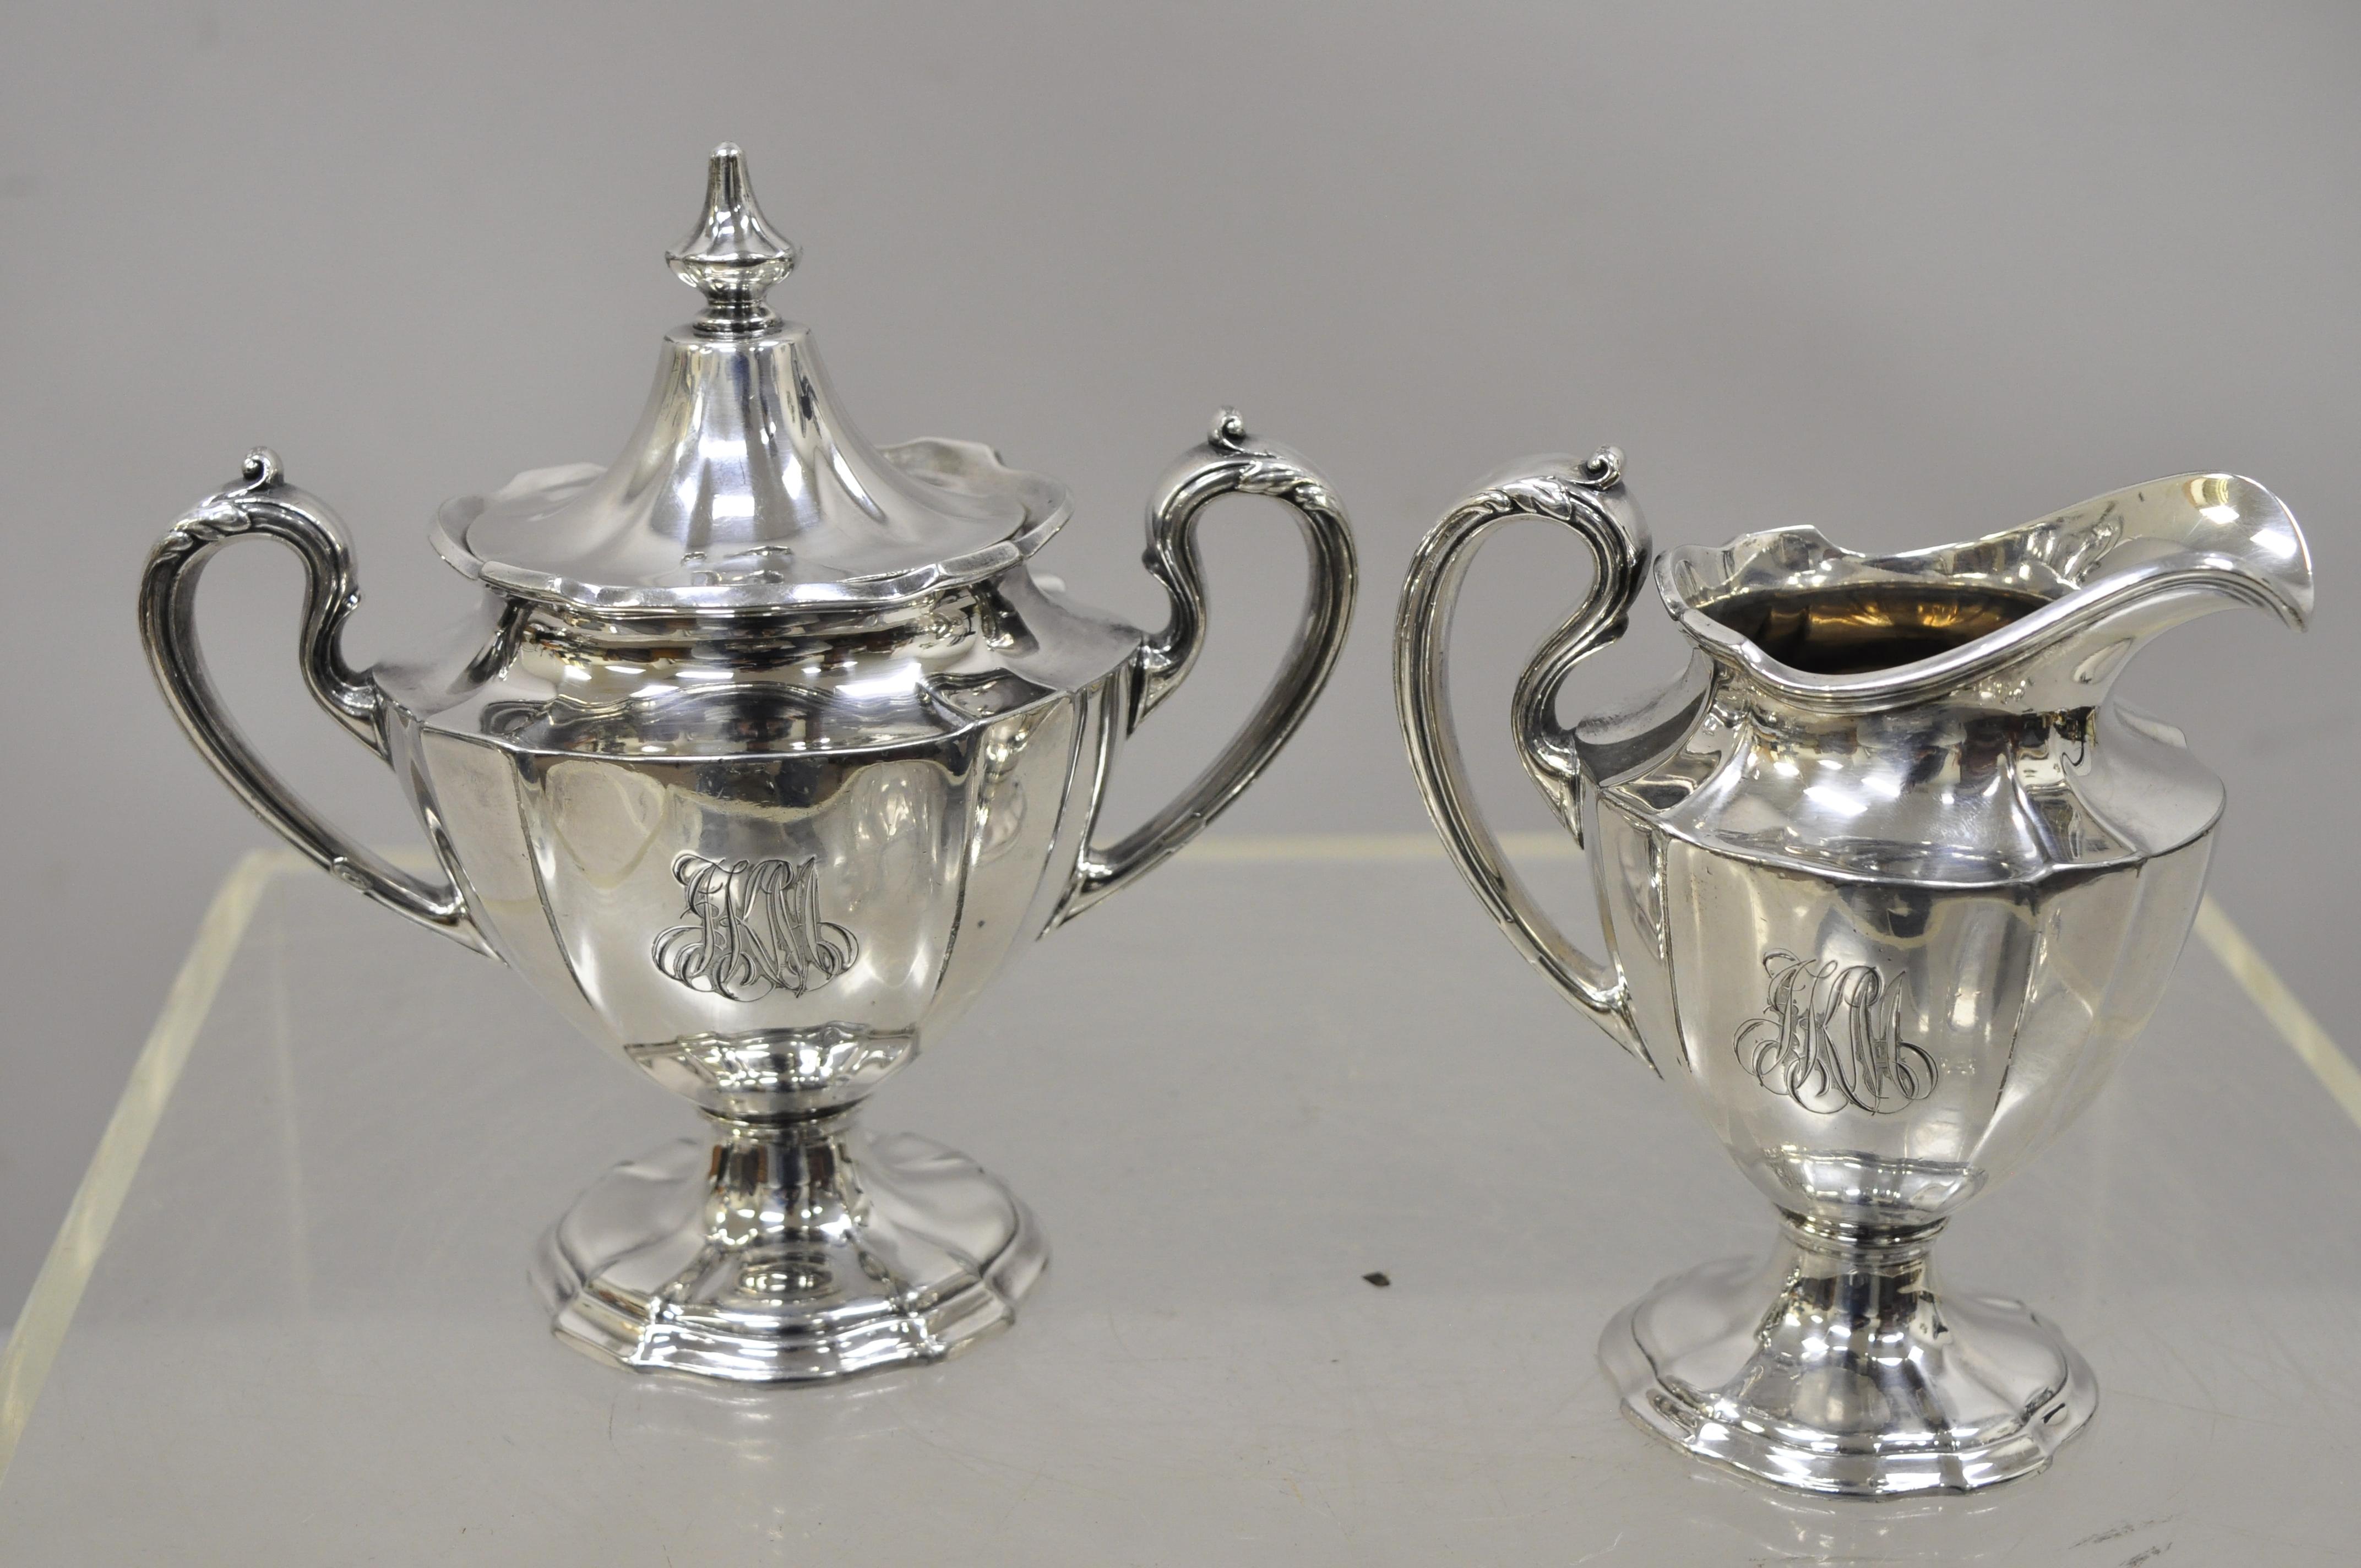 Reed & Barton 3890 silver plate tea coffee creamer service set of 4 pieces. Set includes (1) coffee pot, (1) tea pot, (1) creamer, (1) sugar bowl with lid, original stamp, very nice antique item, quality craftsmanship, circa early 1900s.